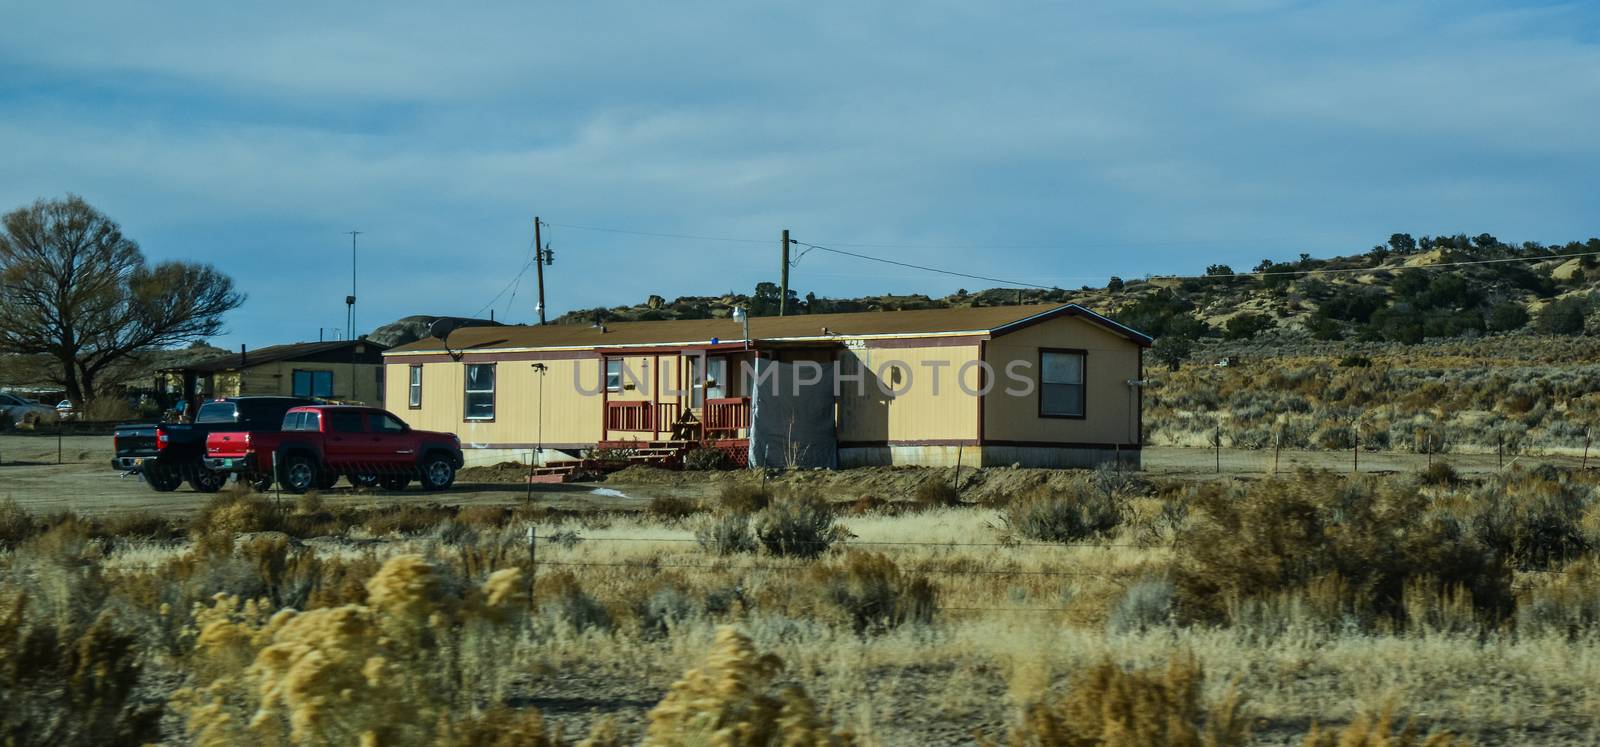 NEW MEXICO, USA - NOVEMBER 19, 2019:  Typical Native American Reservation Homes in New Mexico, USA